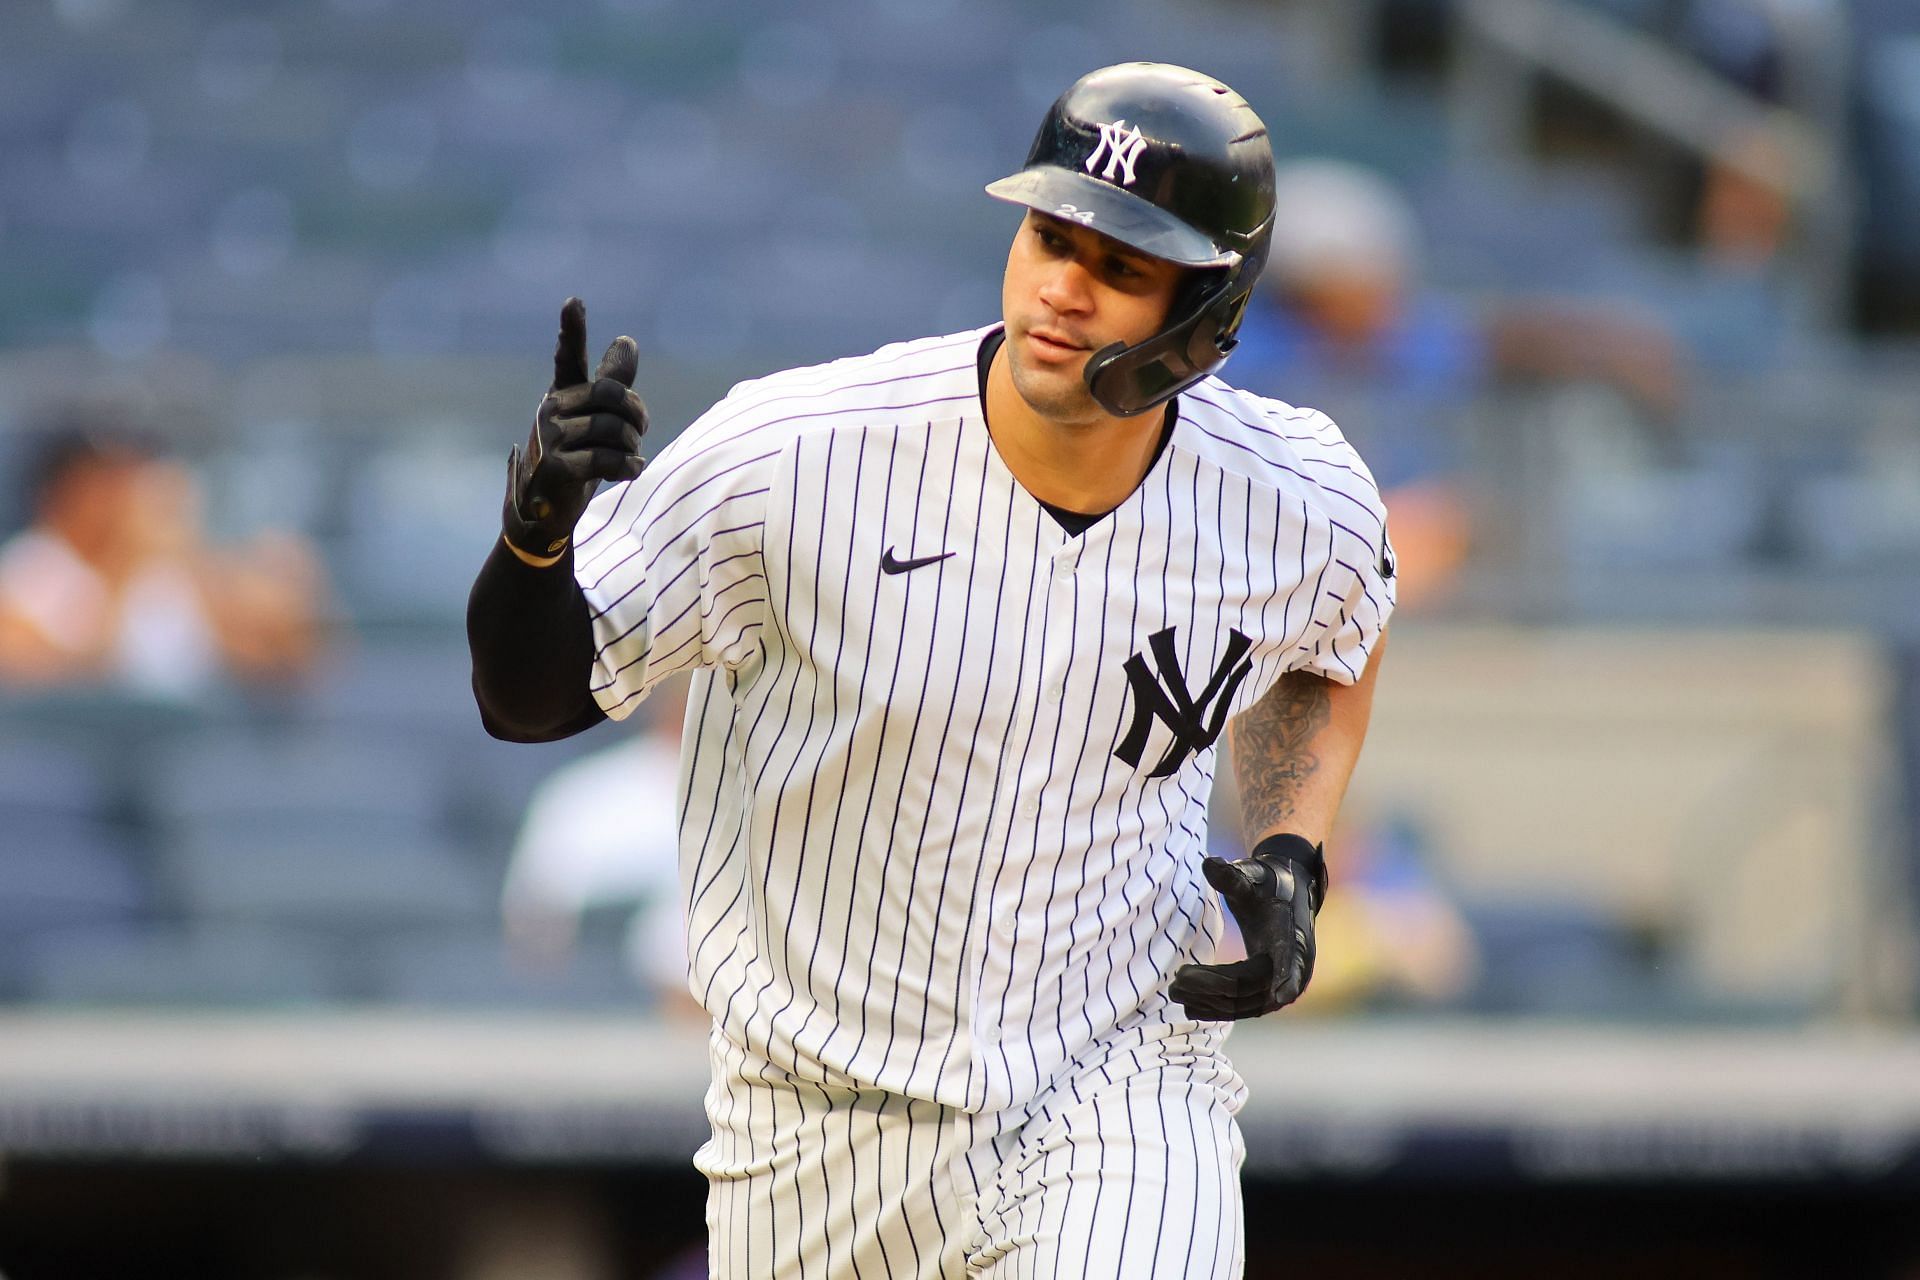 Gary Sanchez played for the New York Mets and New York Yankees